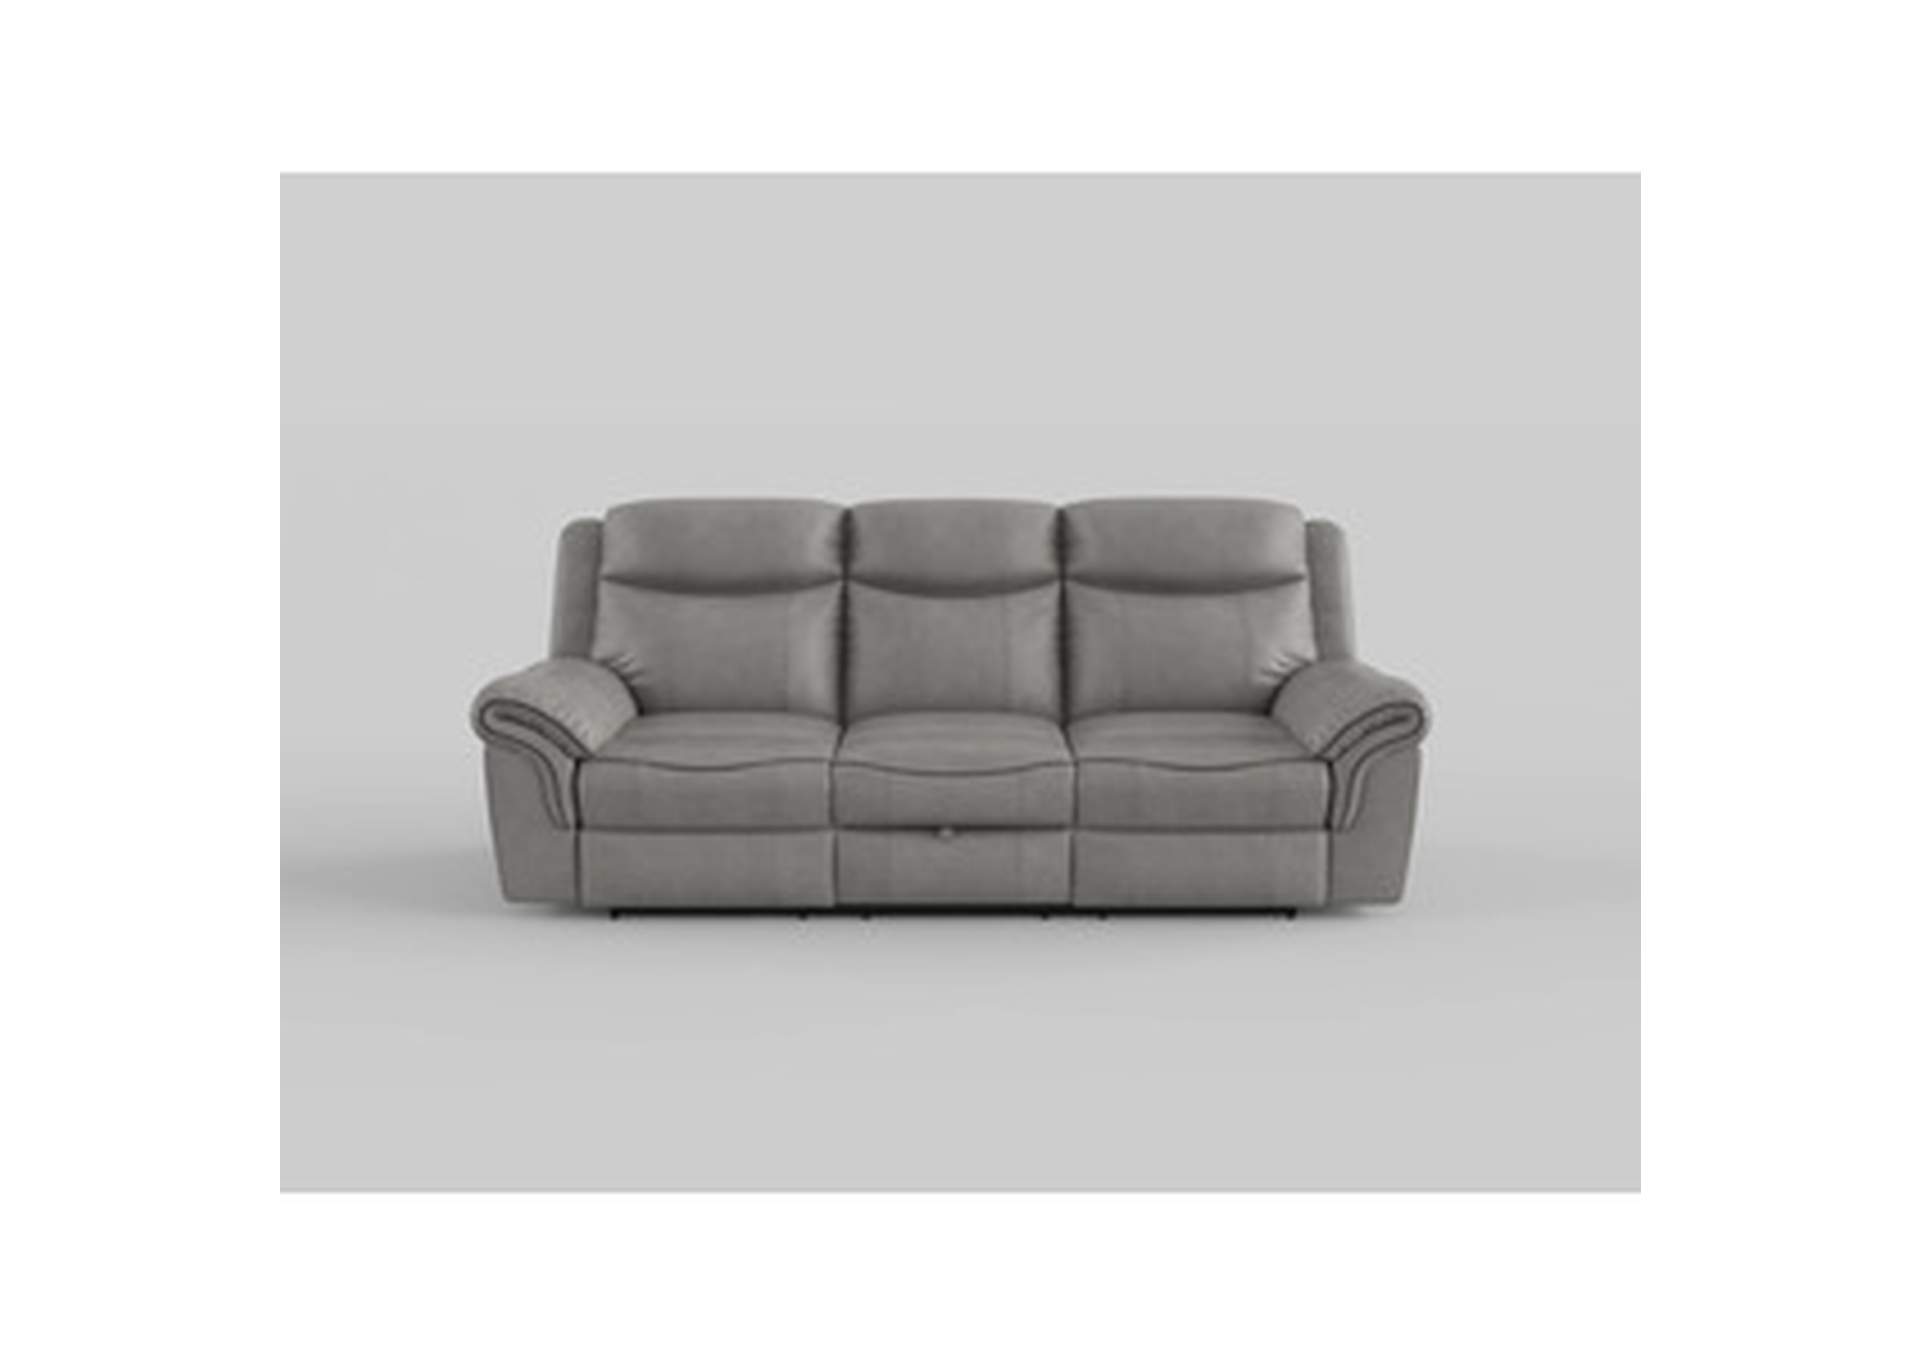 Aram Double Reclining Sofa With Center Drop-Down Cup Holders, Receptacles, Hidden Drawer And Usb Ports,Homelegance